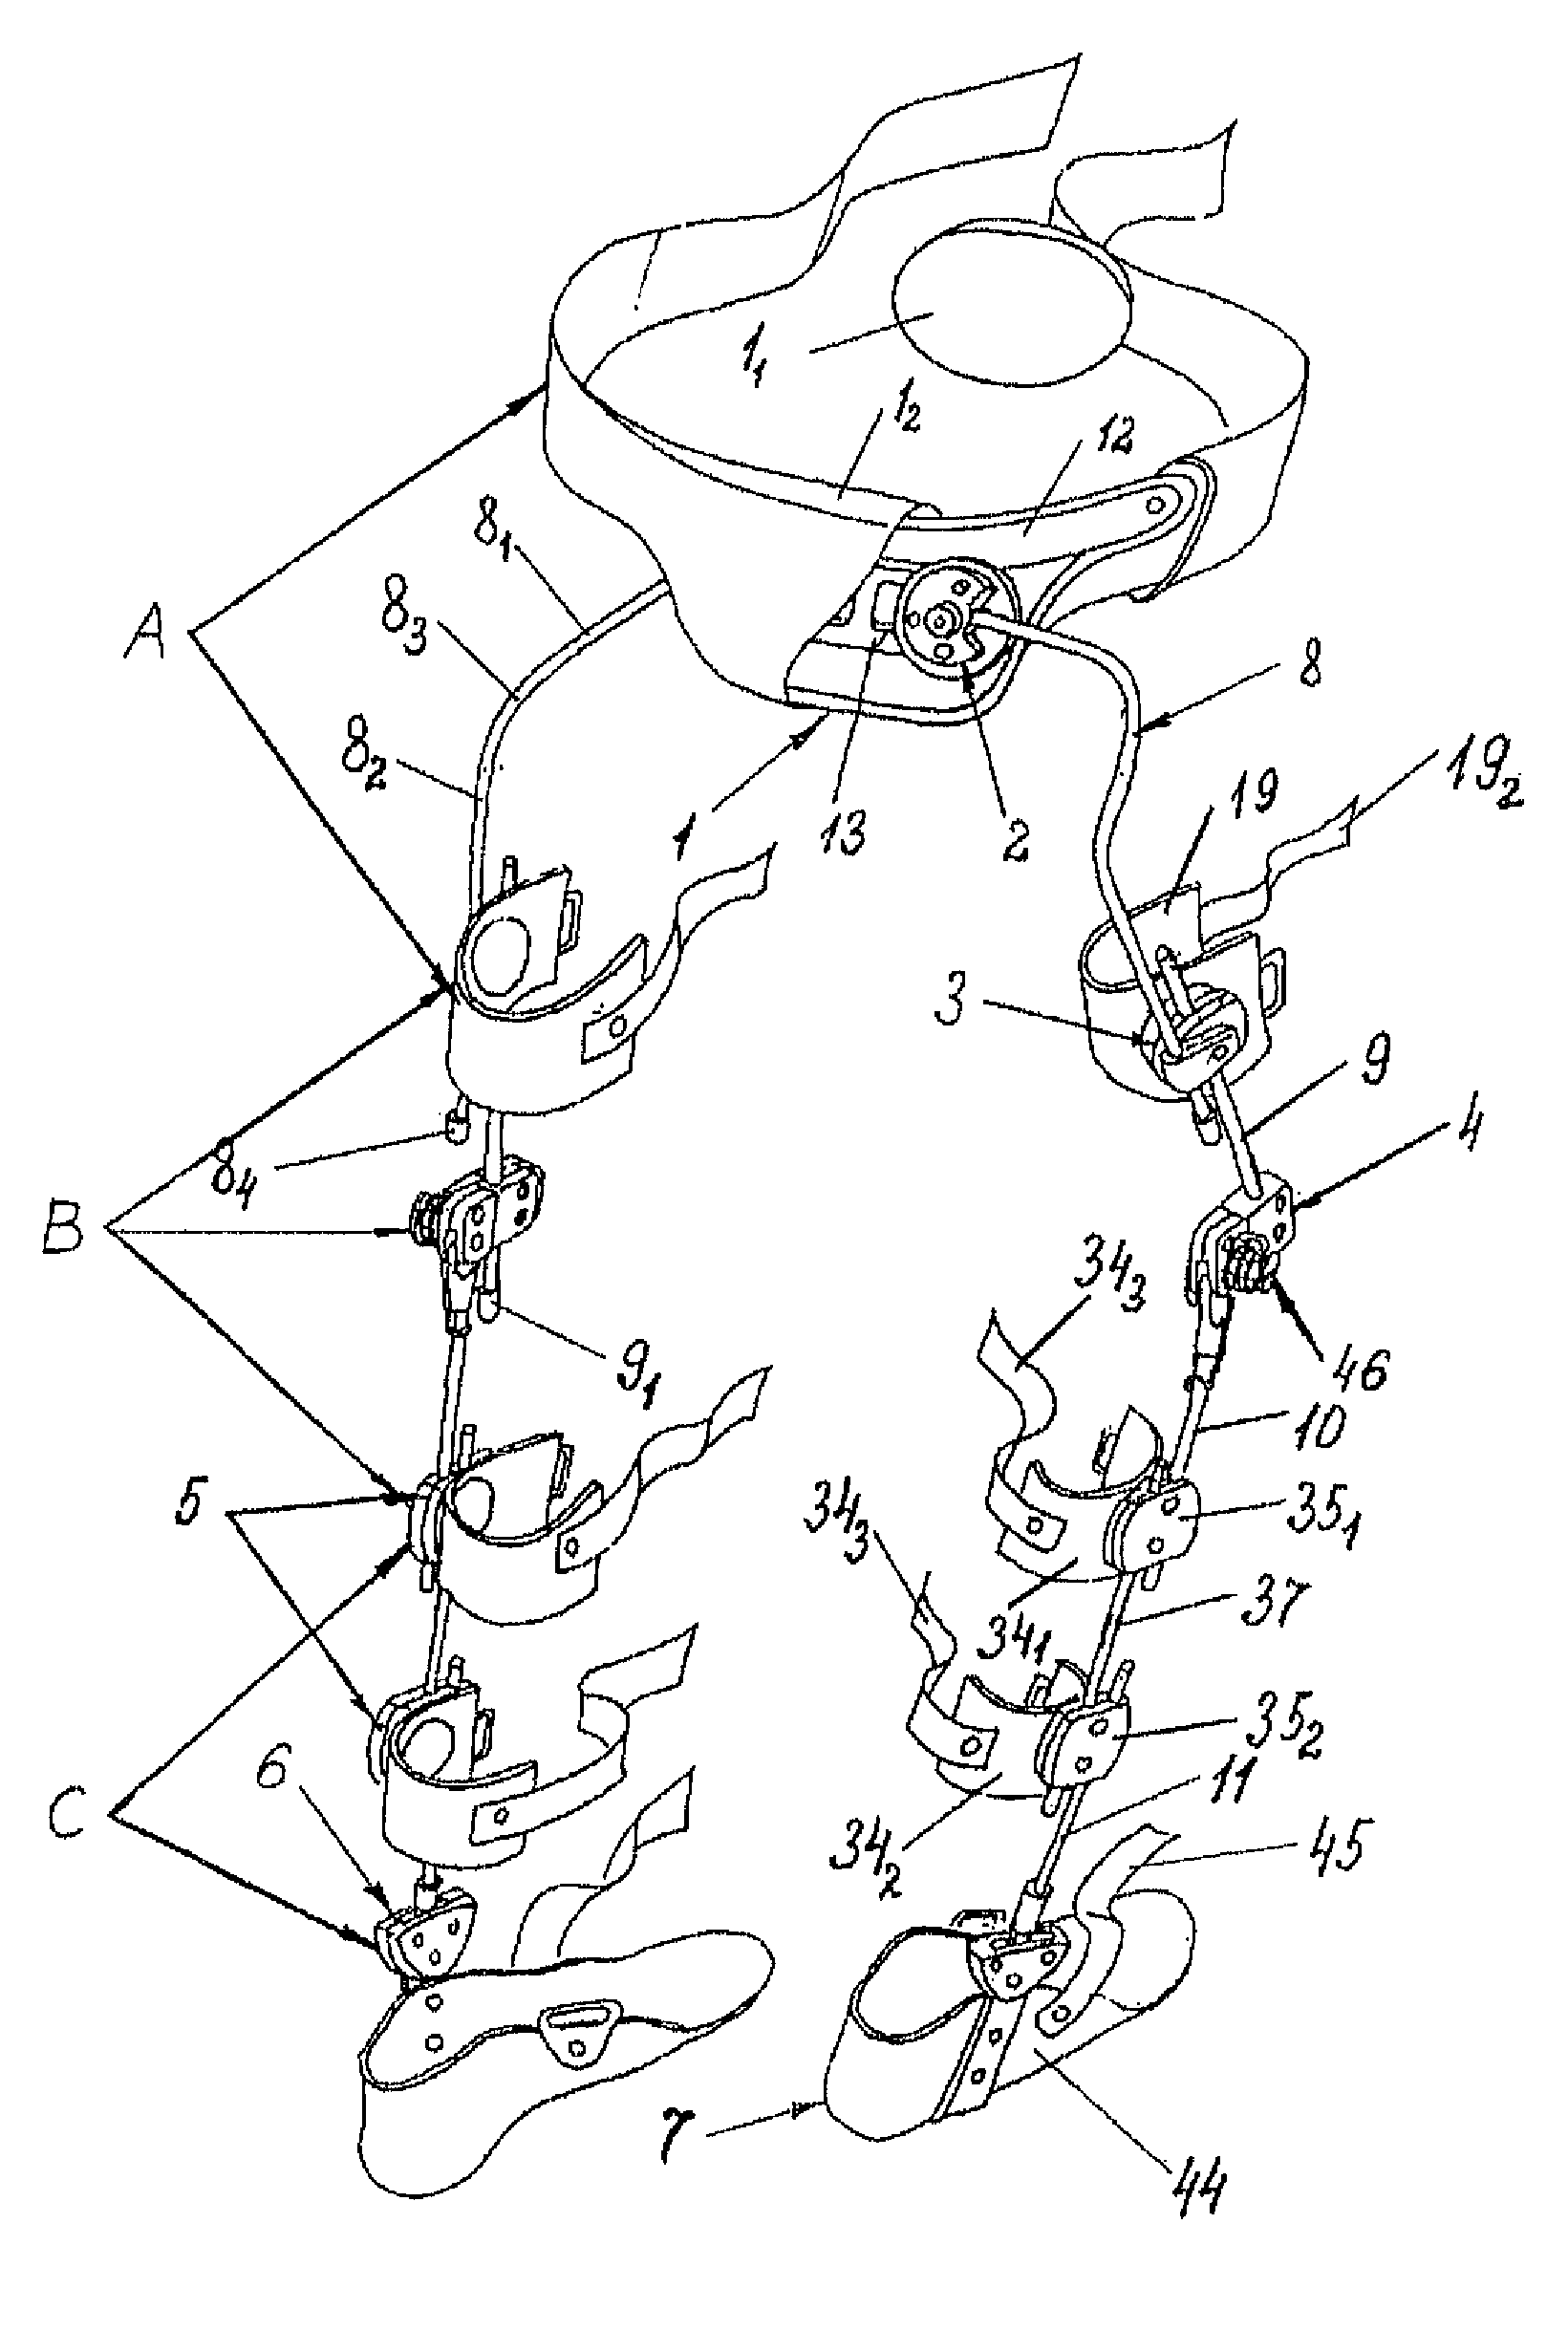 Method for correcting pathological configurations of segments of the lower extremities and device for realizing same